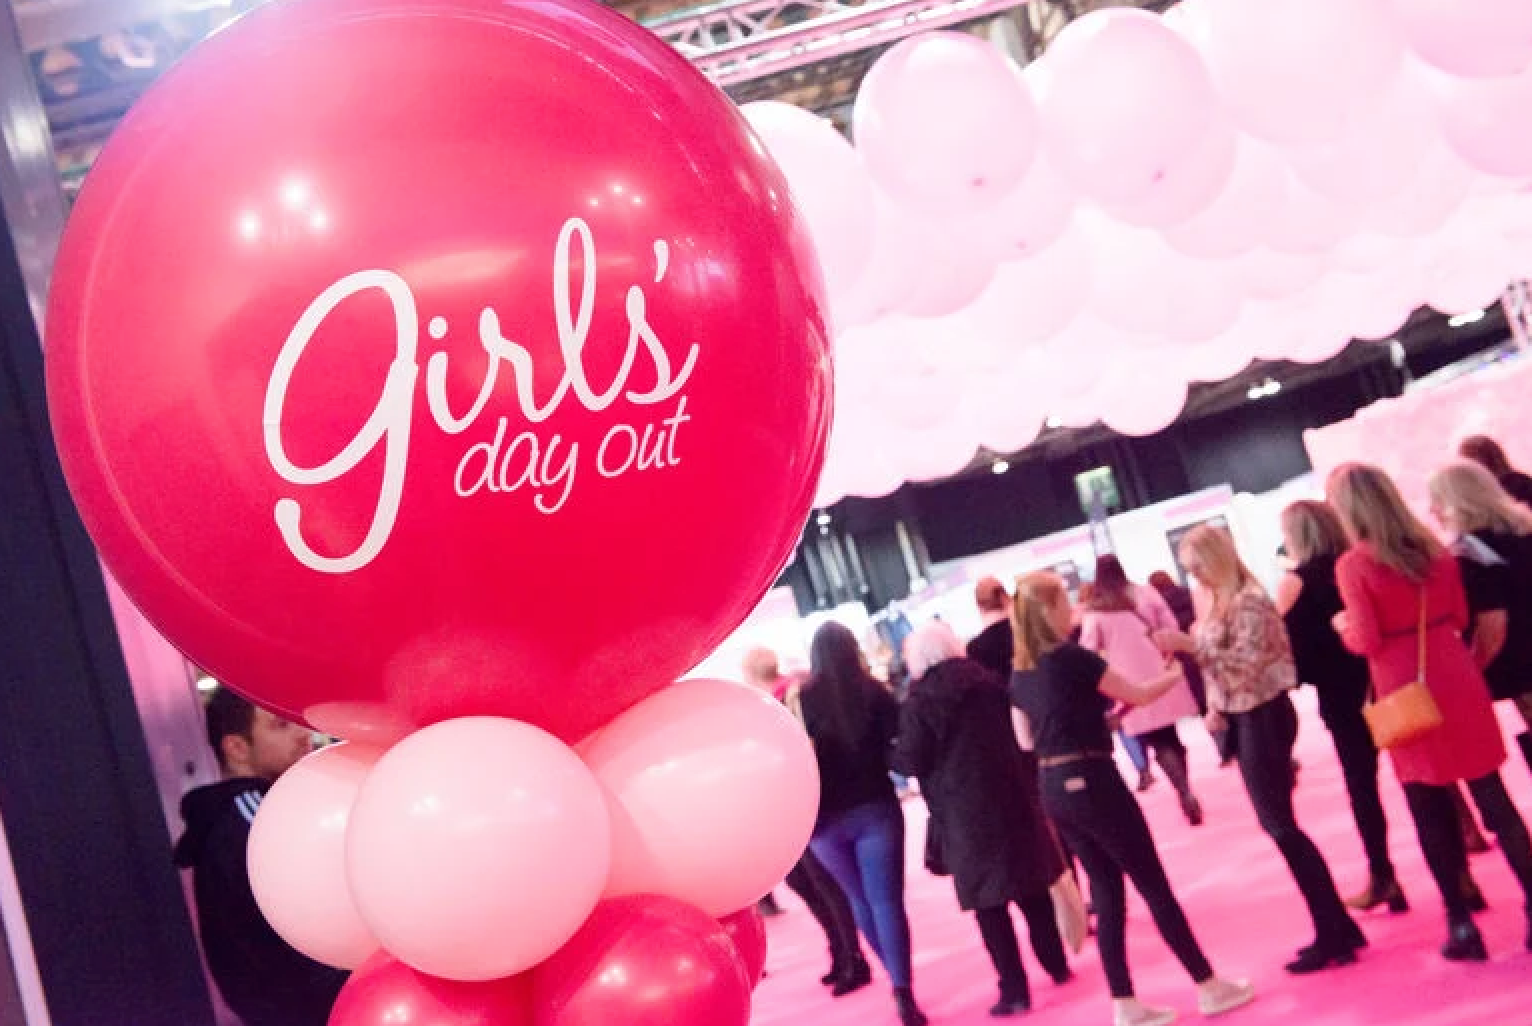 Your Pleasure Toys at Girls Day Out, May 2022?